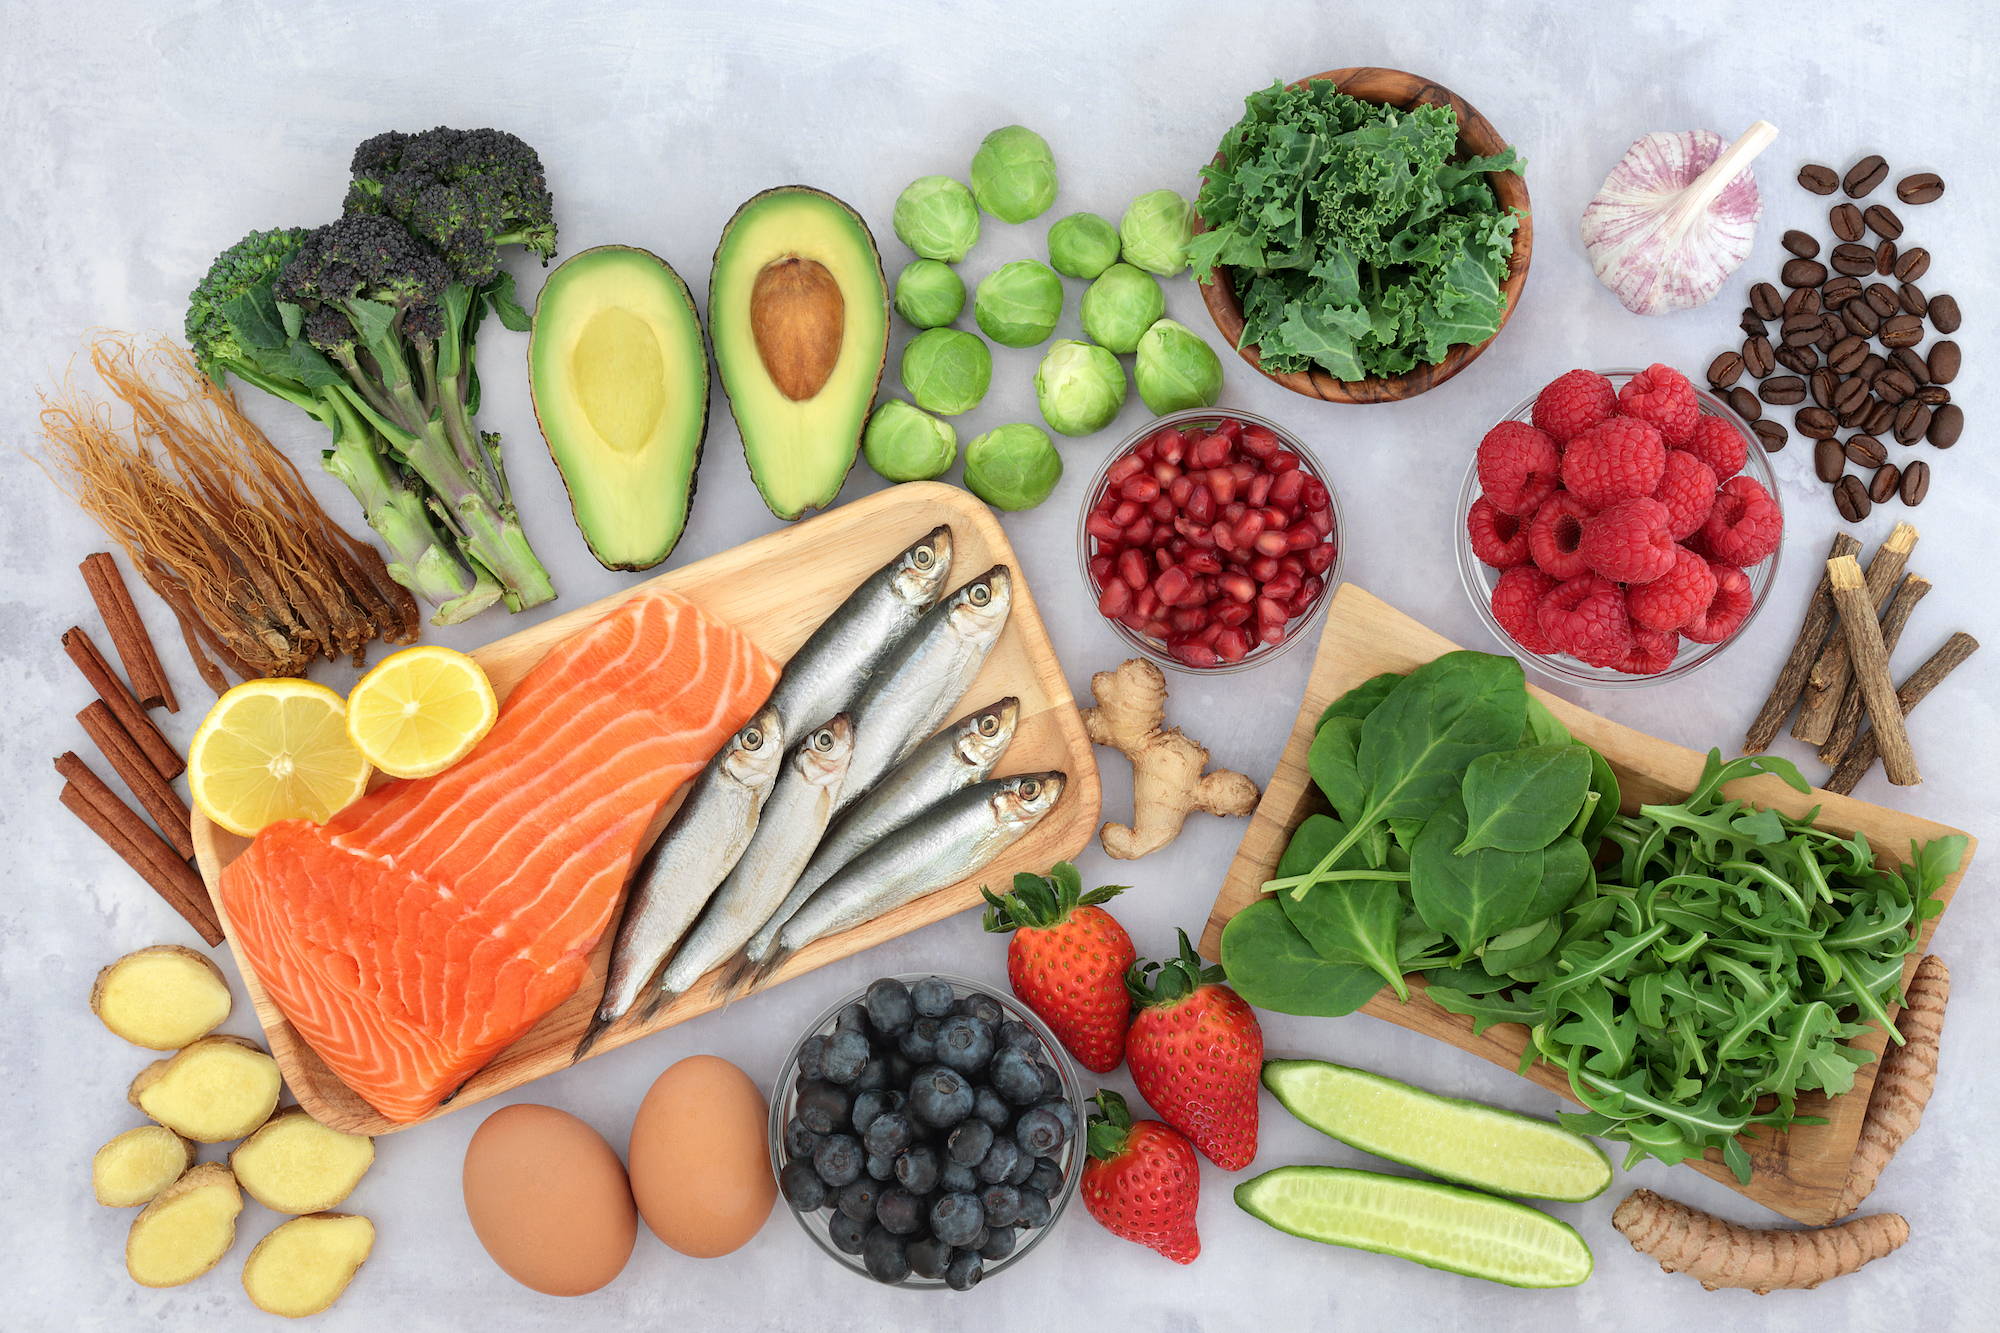 A blood sugar-balancing, anti-inflammatory diet is beneficial for migraine support